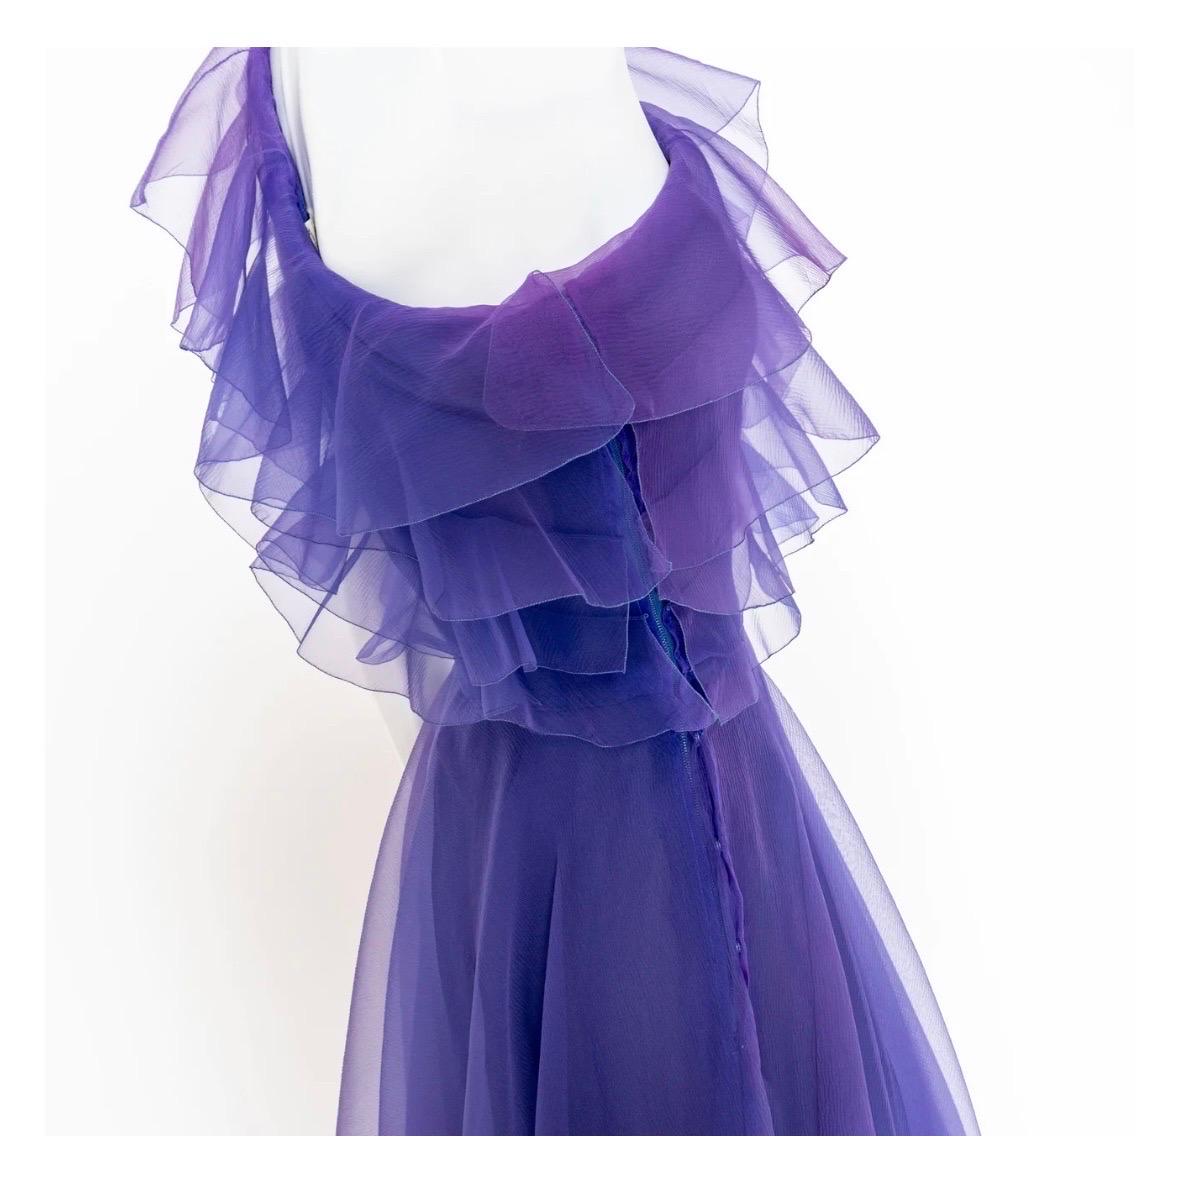 Women's Christian Dior Haute Couture Silk Organza AW 1972 Gown For Sale